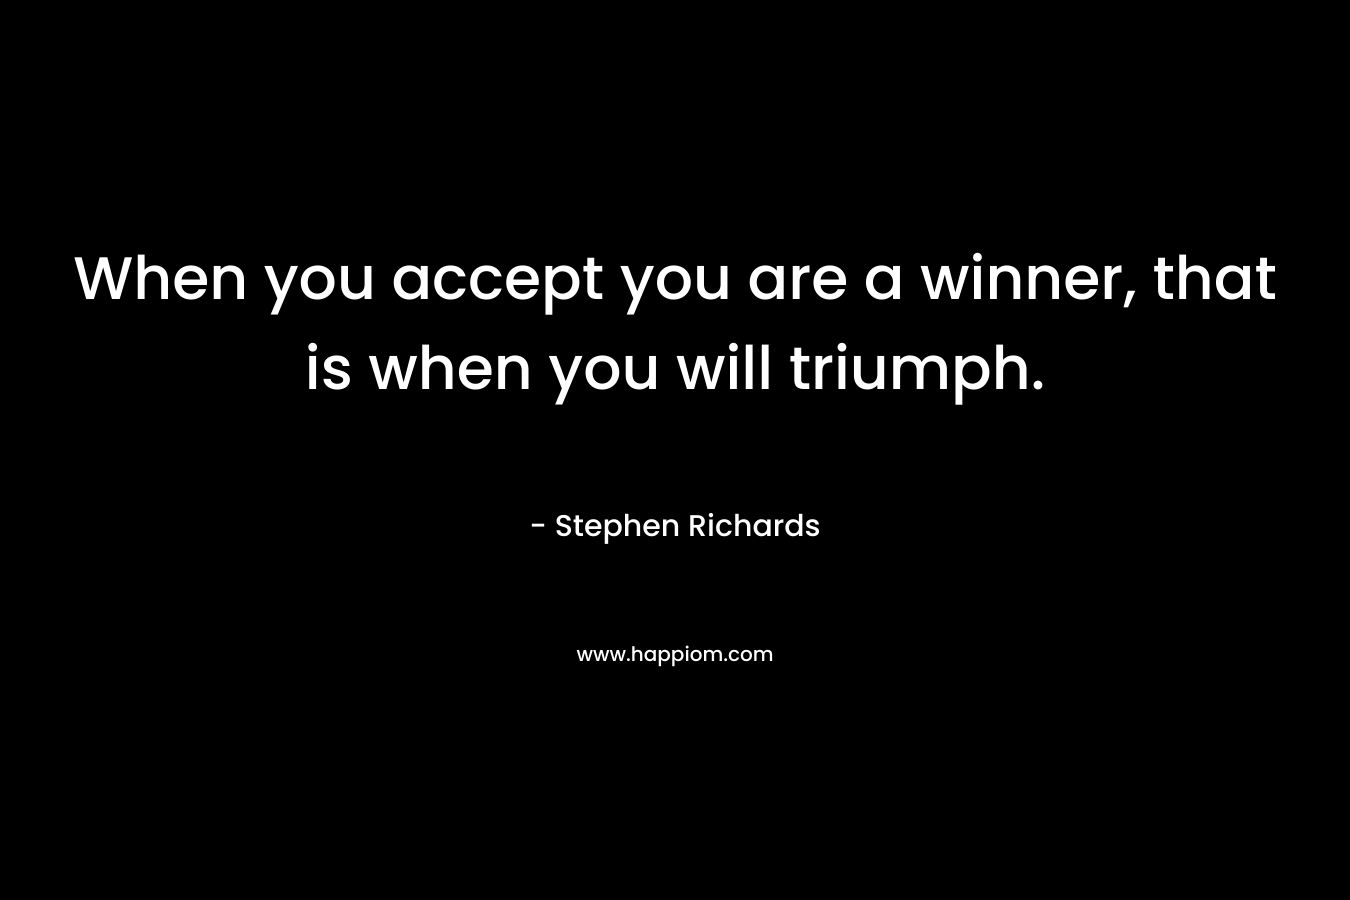 When you accept you are a winner, that is when you will triumph.